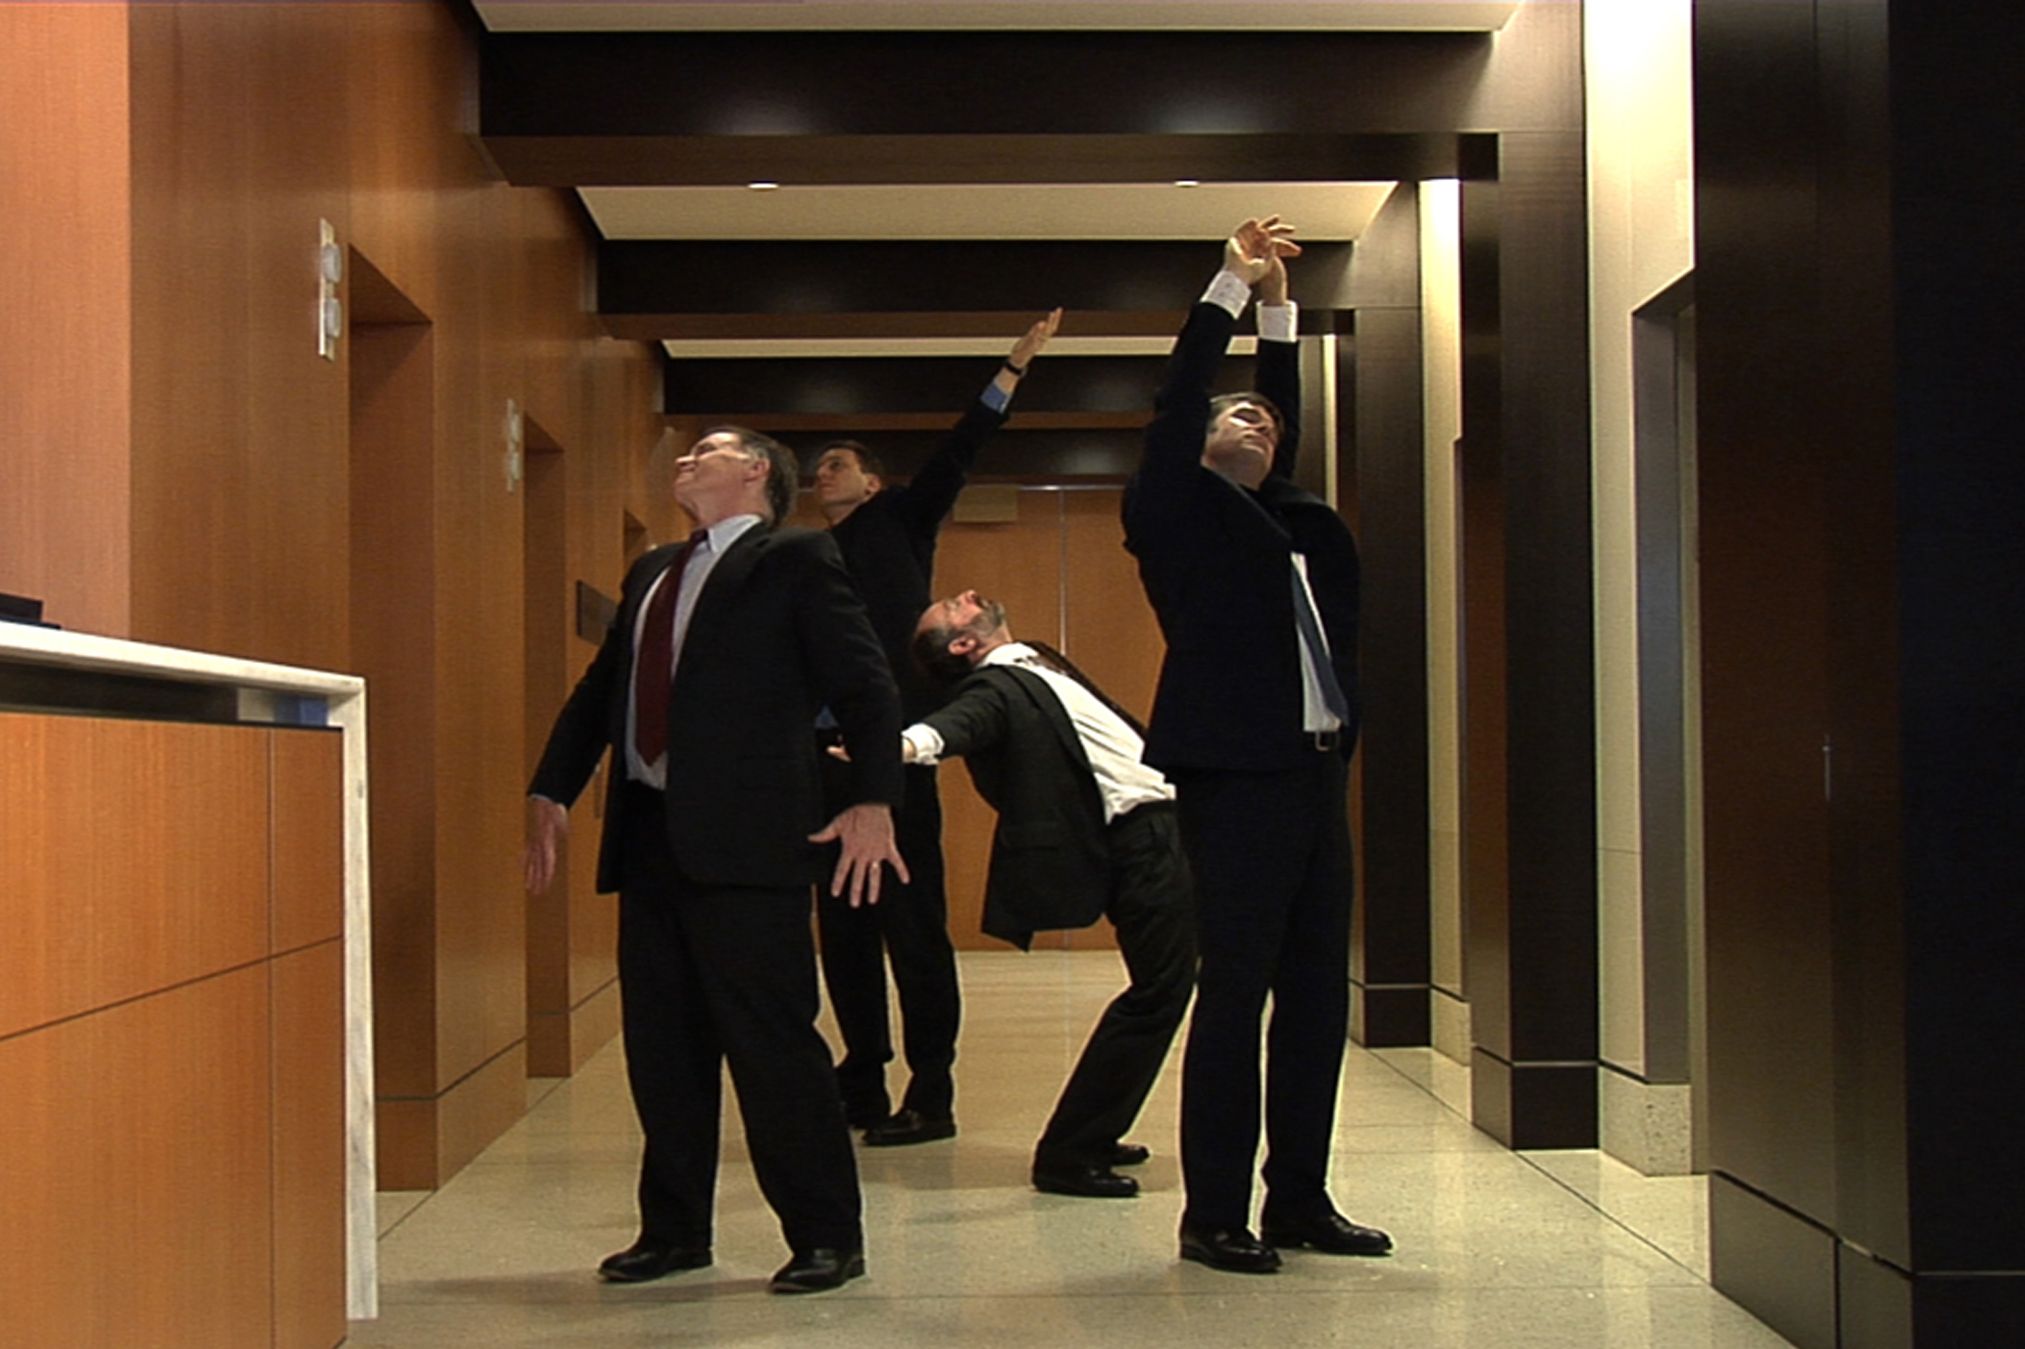 Men in suits stretch in a hall with wood panels.